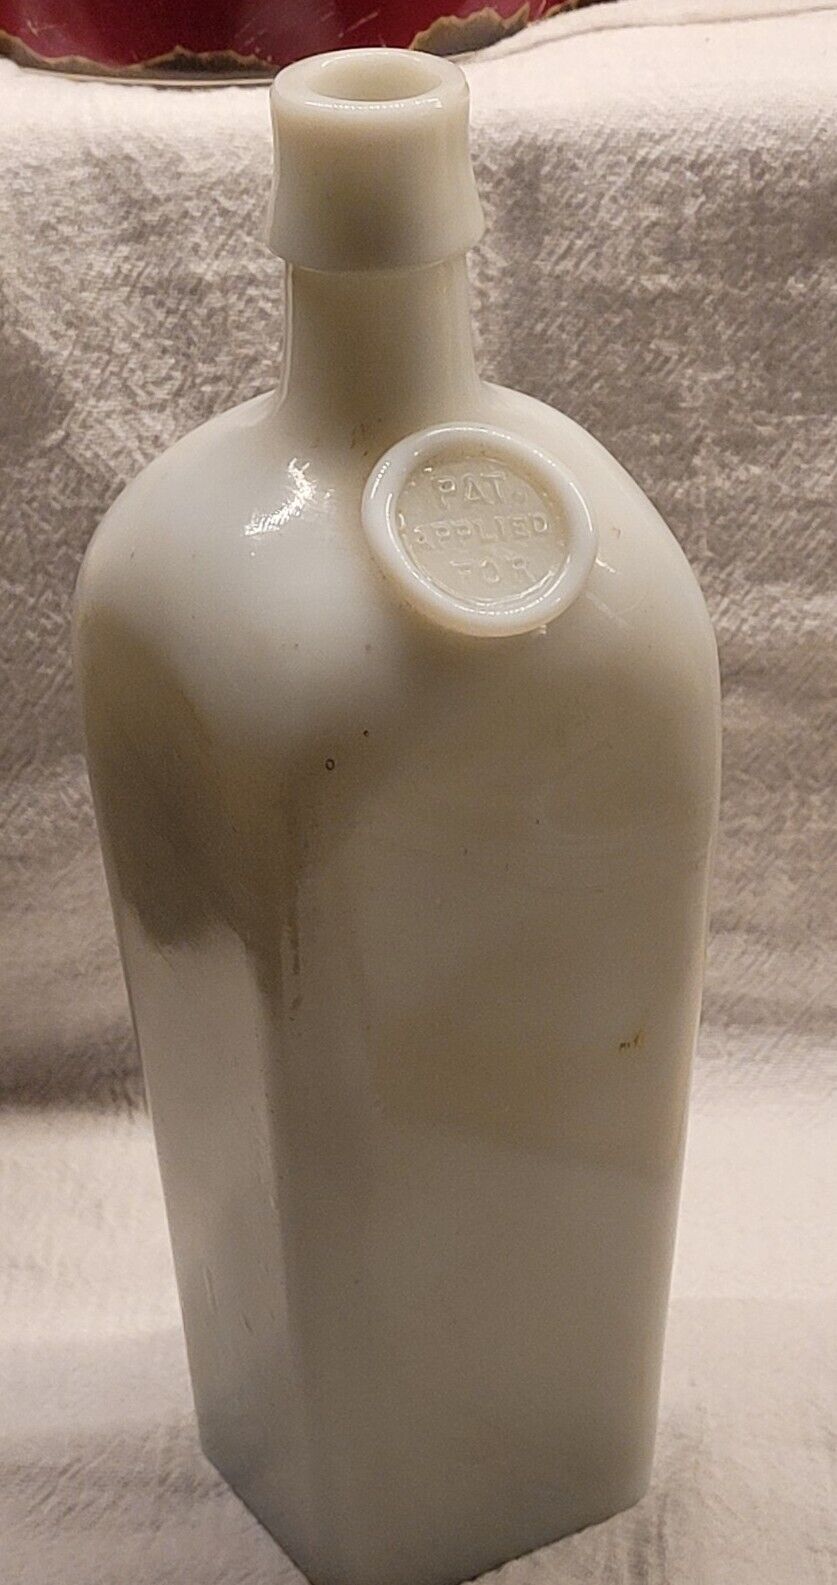 EMBOSSED S  B ROTHENBERG SOLE AGENTS WESTERN BITTERS GIN MILK GLASS APPLIED SEAL